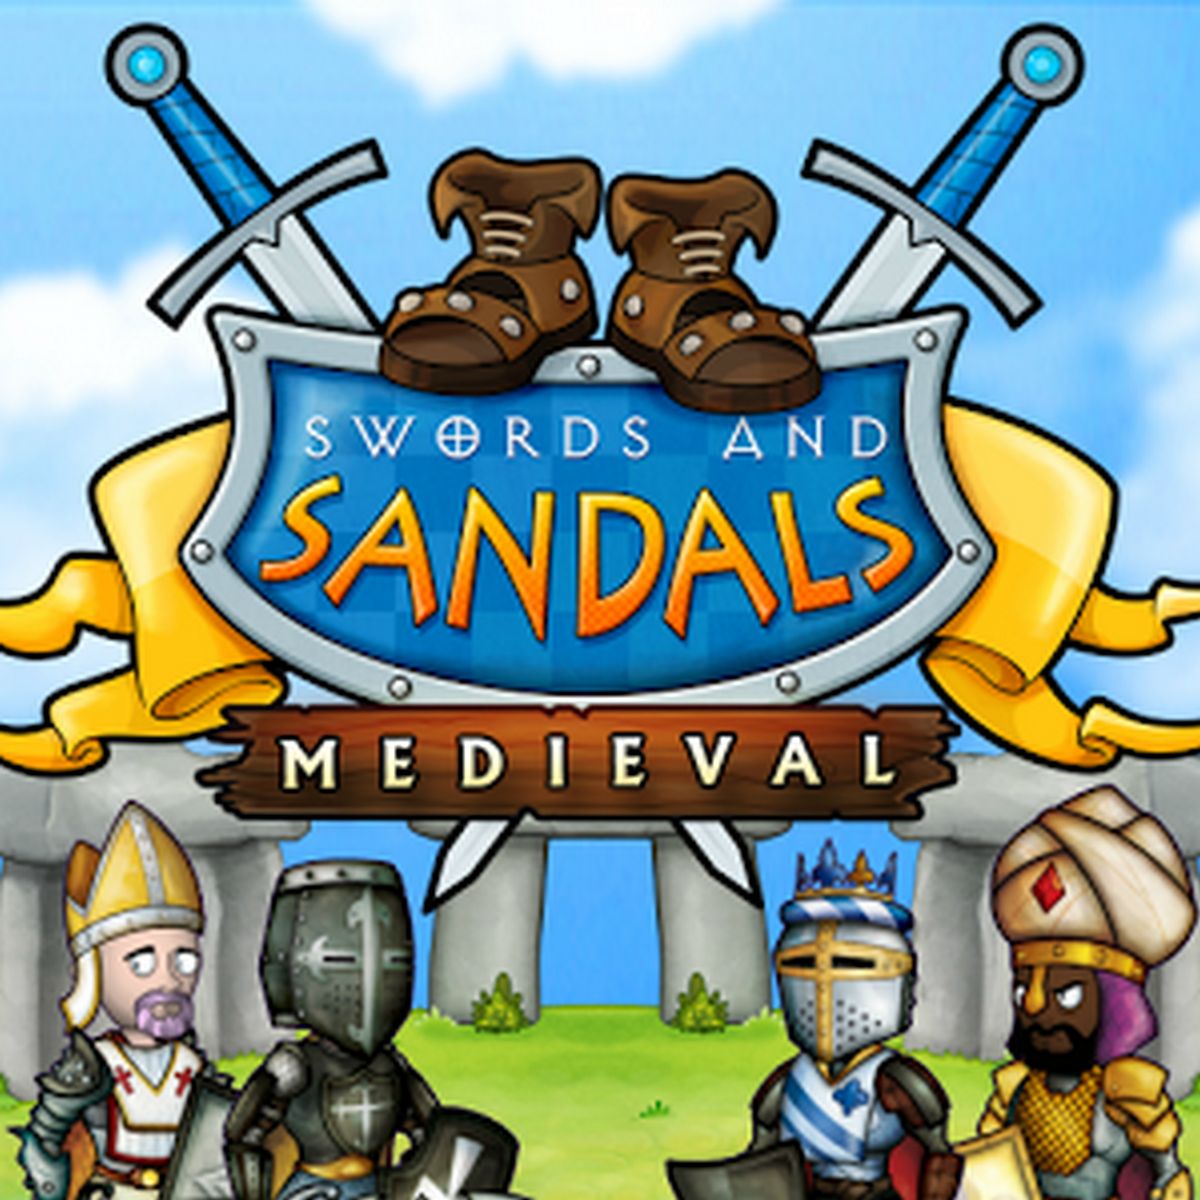 Swords and Sandals Medieval